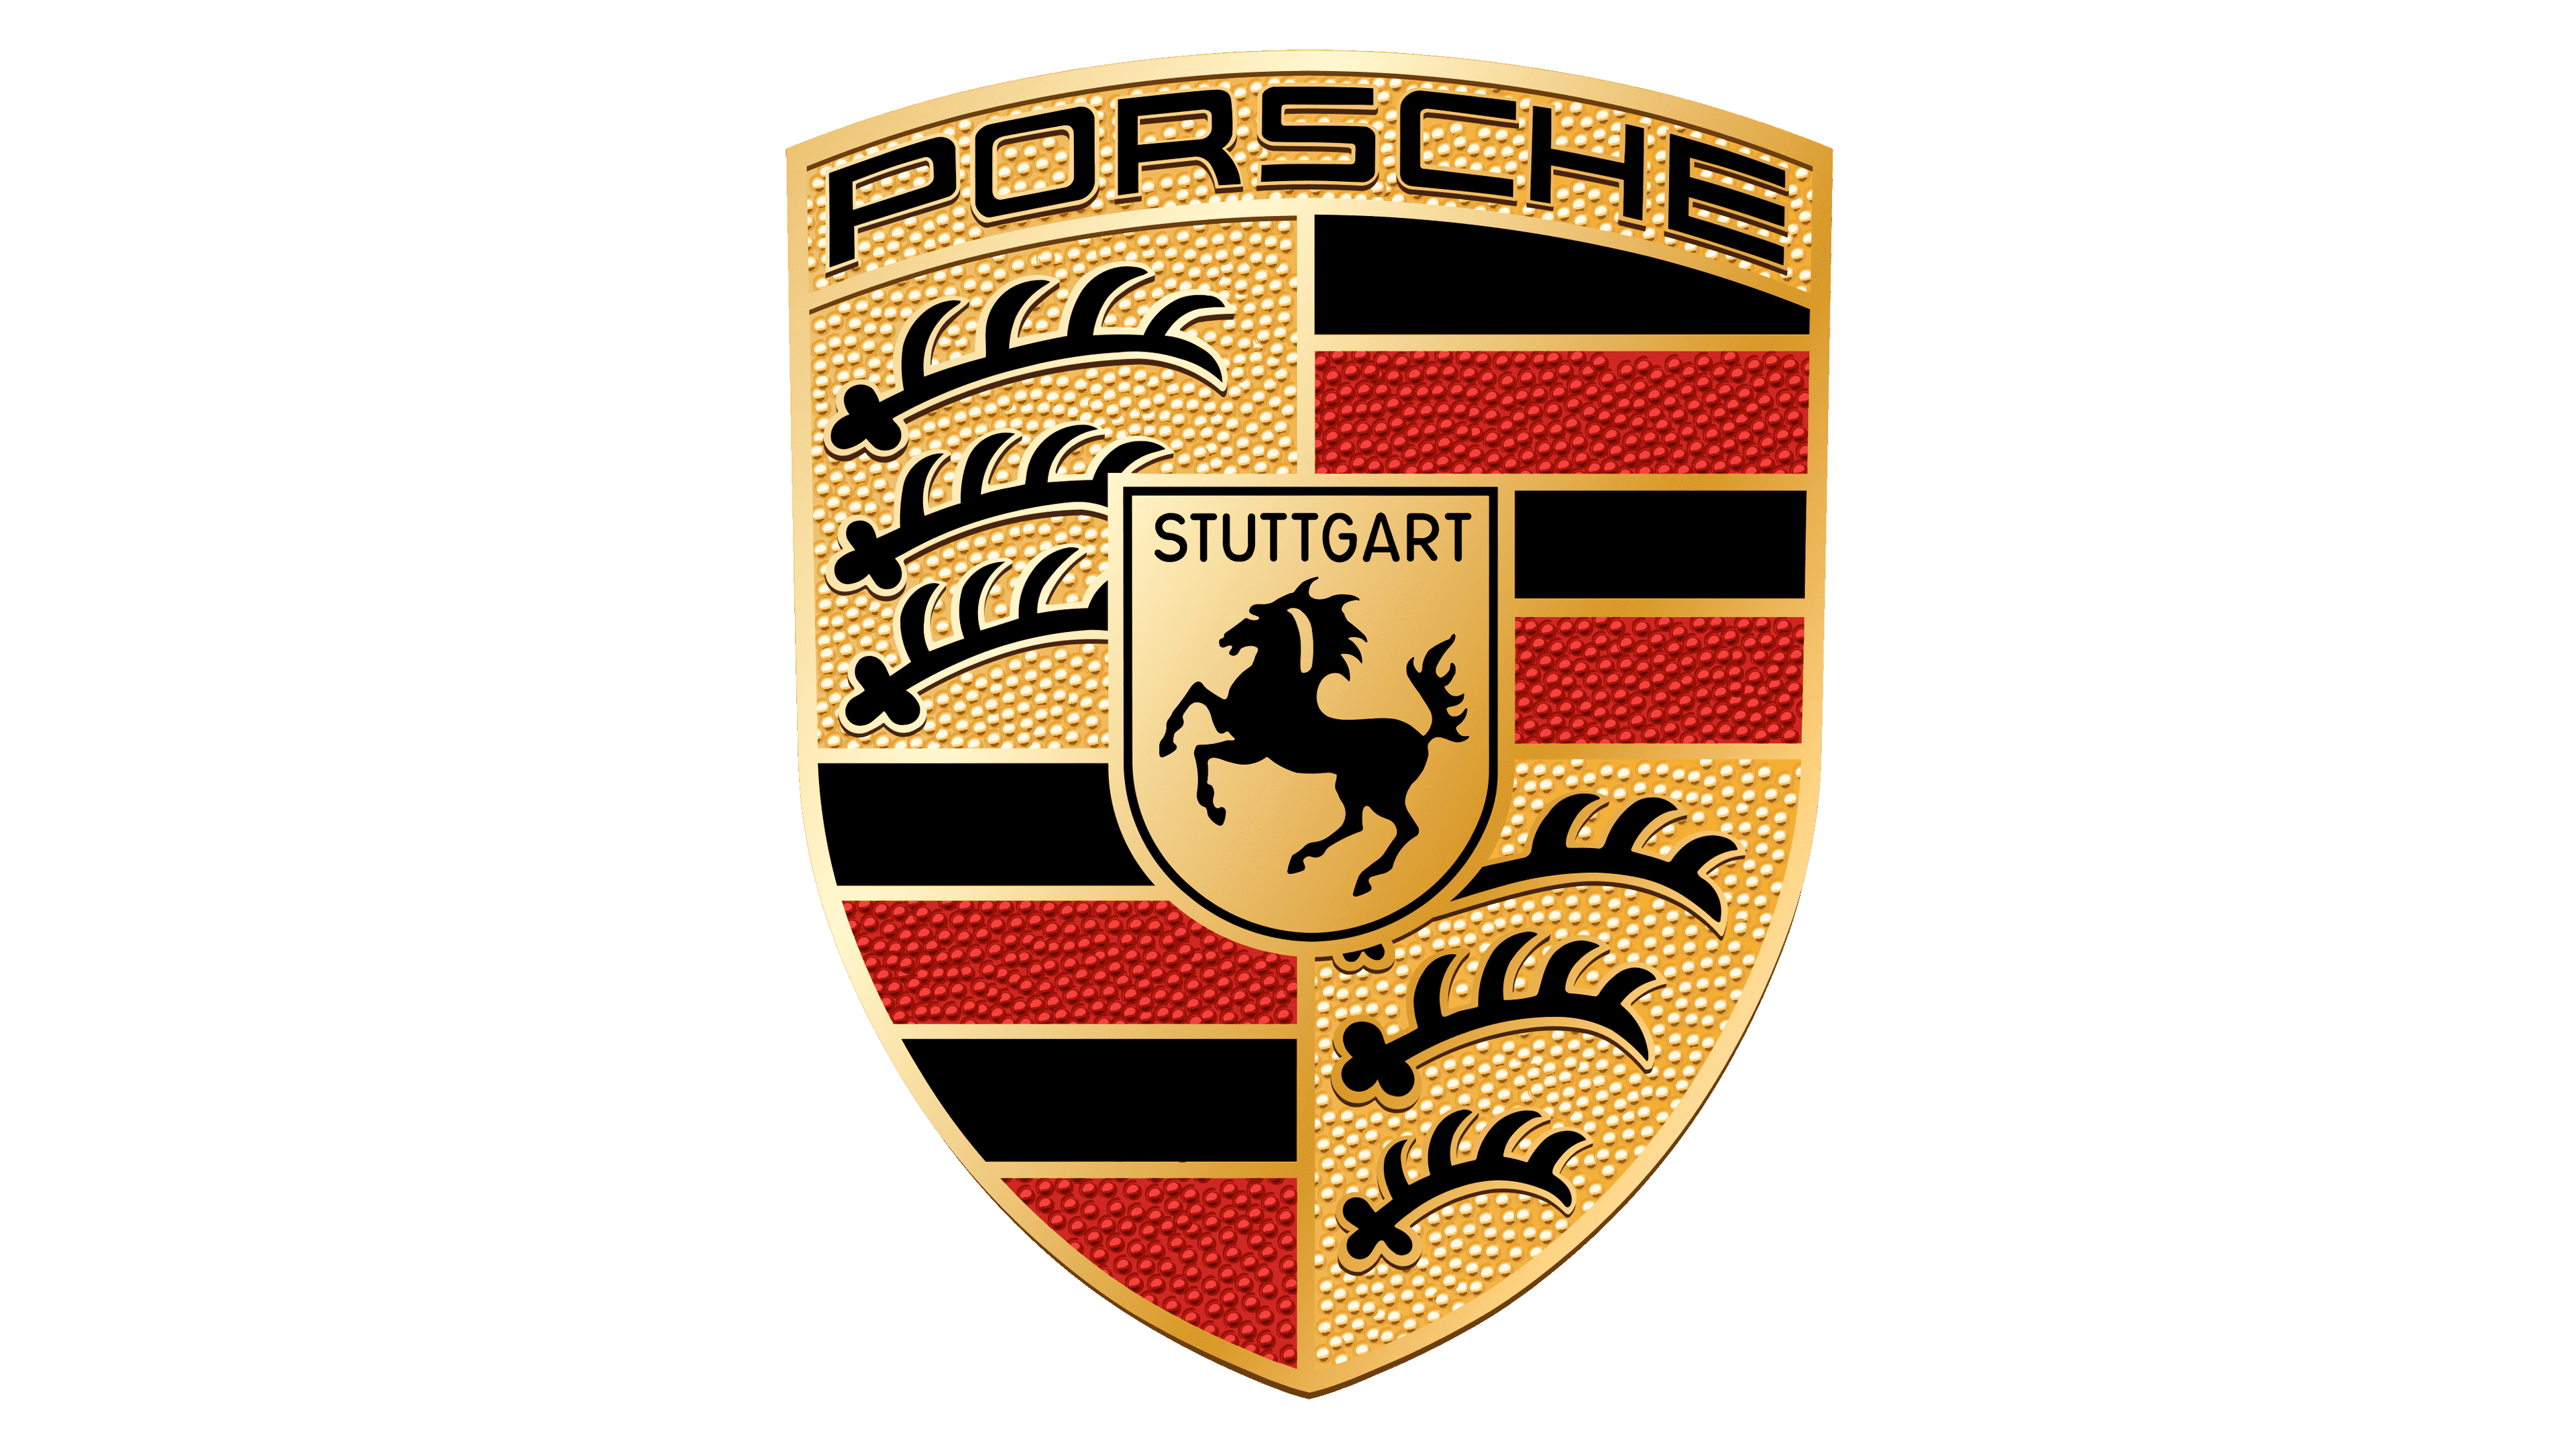 Porsche reports a 25% increase in operational profit in Q1 due to record deliveries.-thumnail